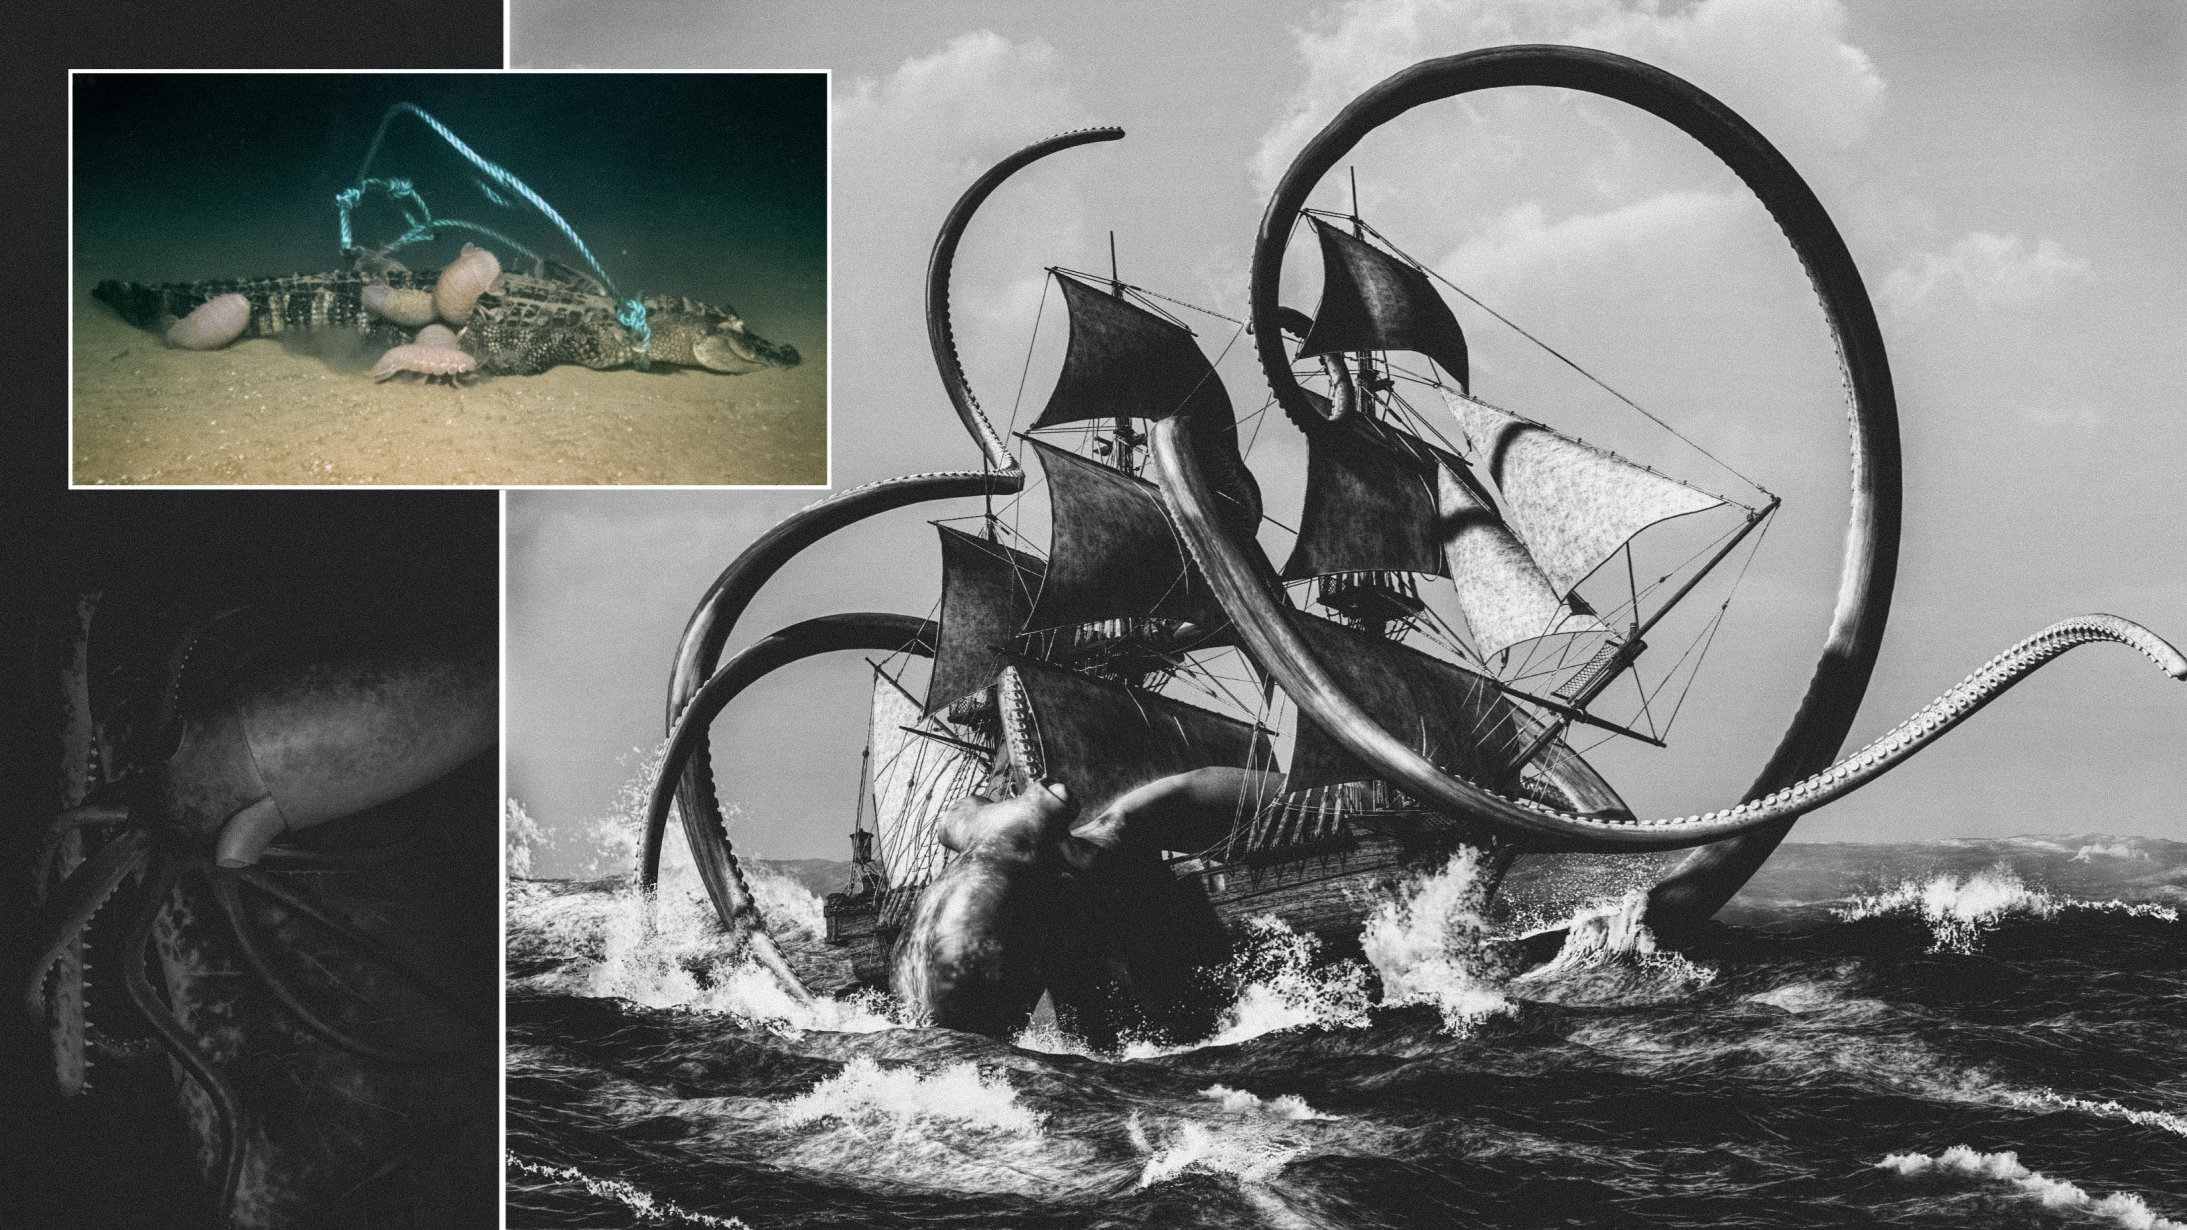 Could Kraken really exist? Scientists sank three dead alligators deep into the sea, one of them left behind only scary explanations! 1